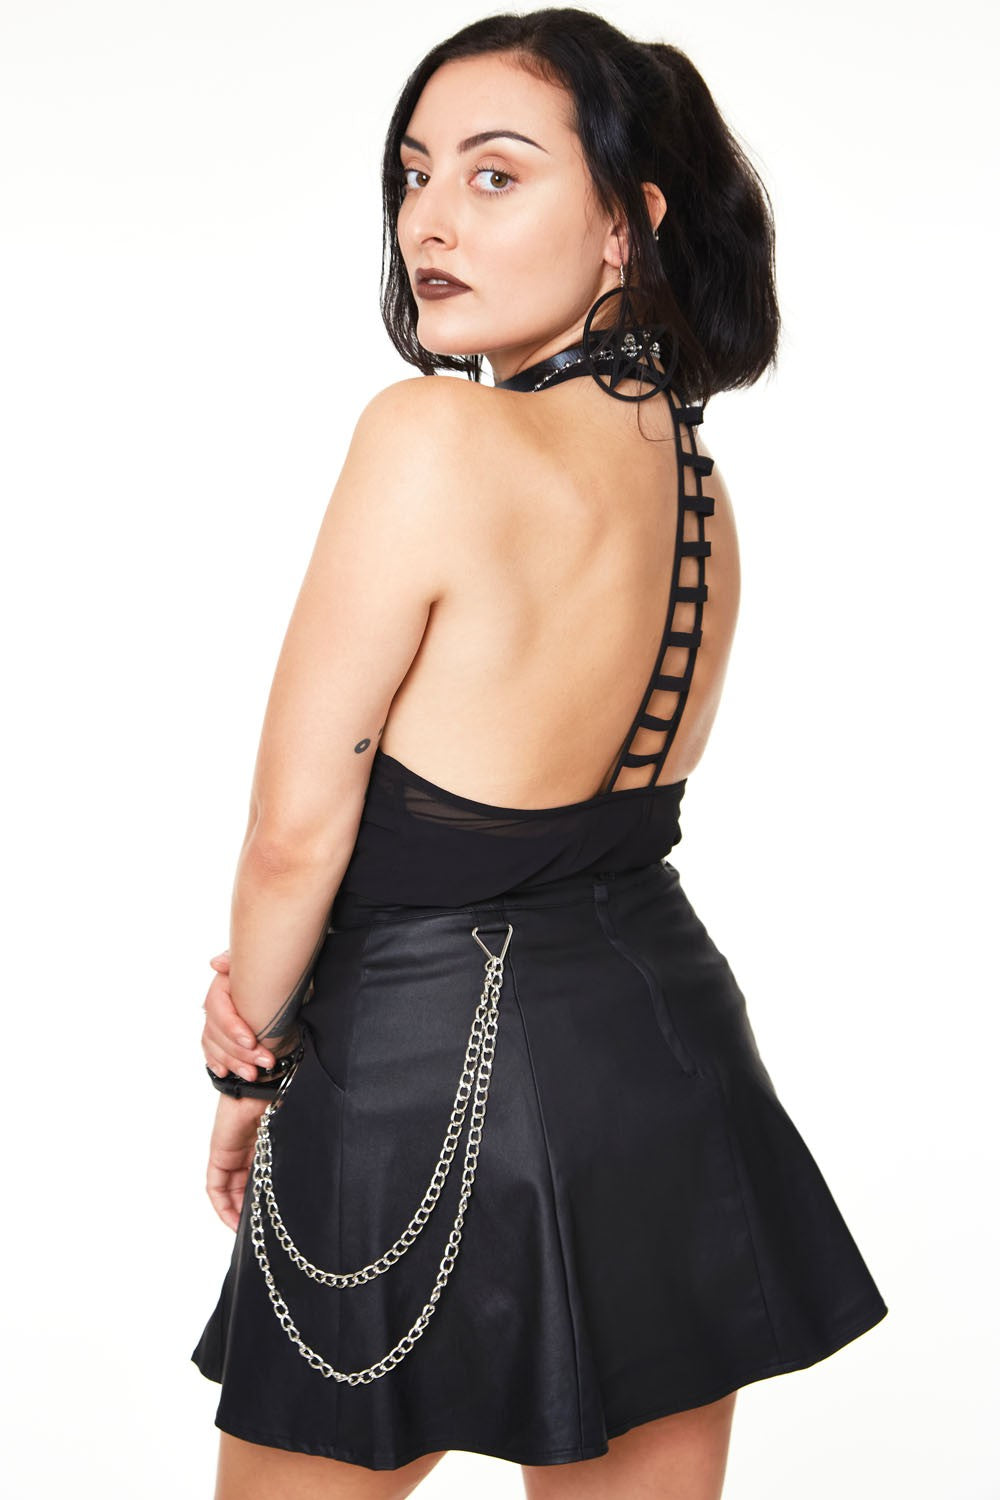 Rear view of the Vegan Leather Skirt with O-Ring and Chain Details.